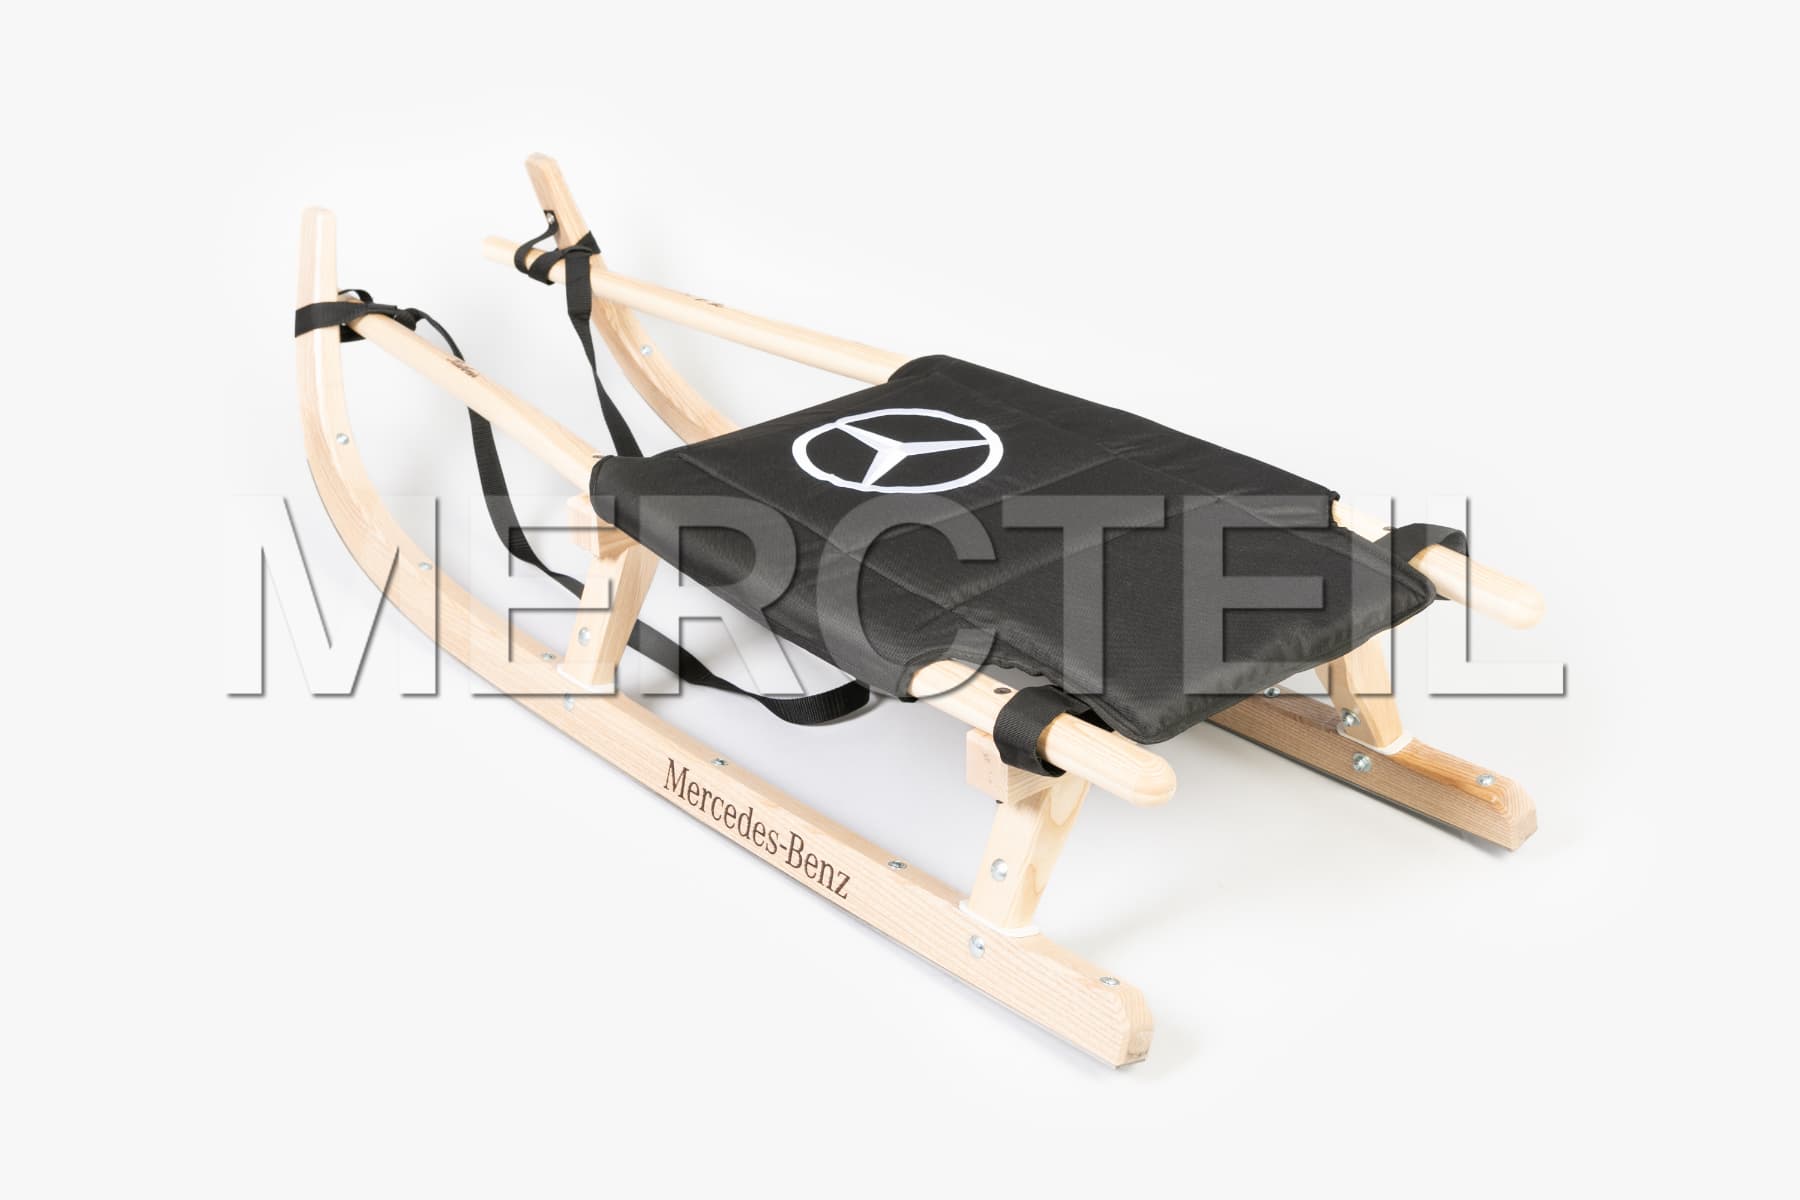 Wooden Snow Sled Genuine Two Seater Kathrein Rodel with Upholstered Seat Mercedes-Benz Collection (Part number: B10021139)